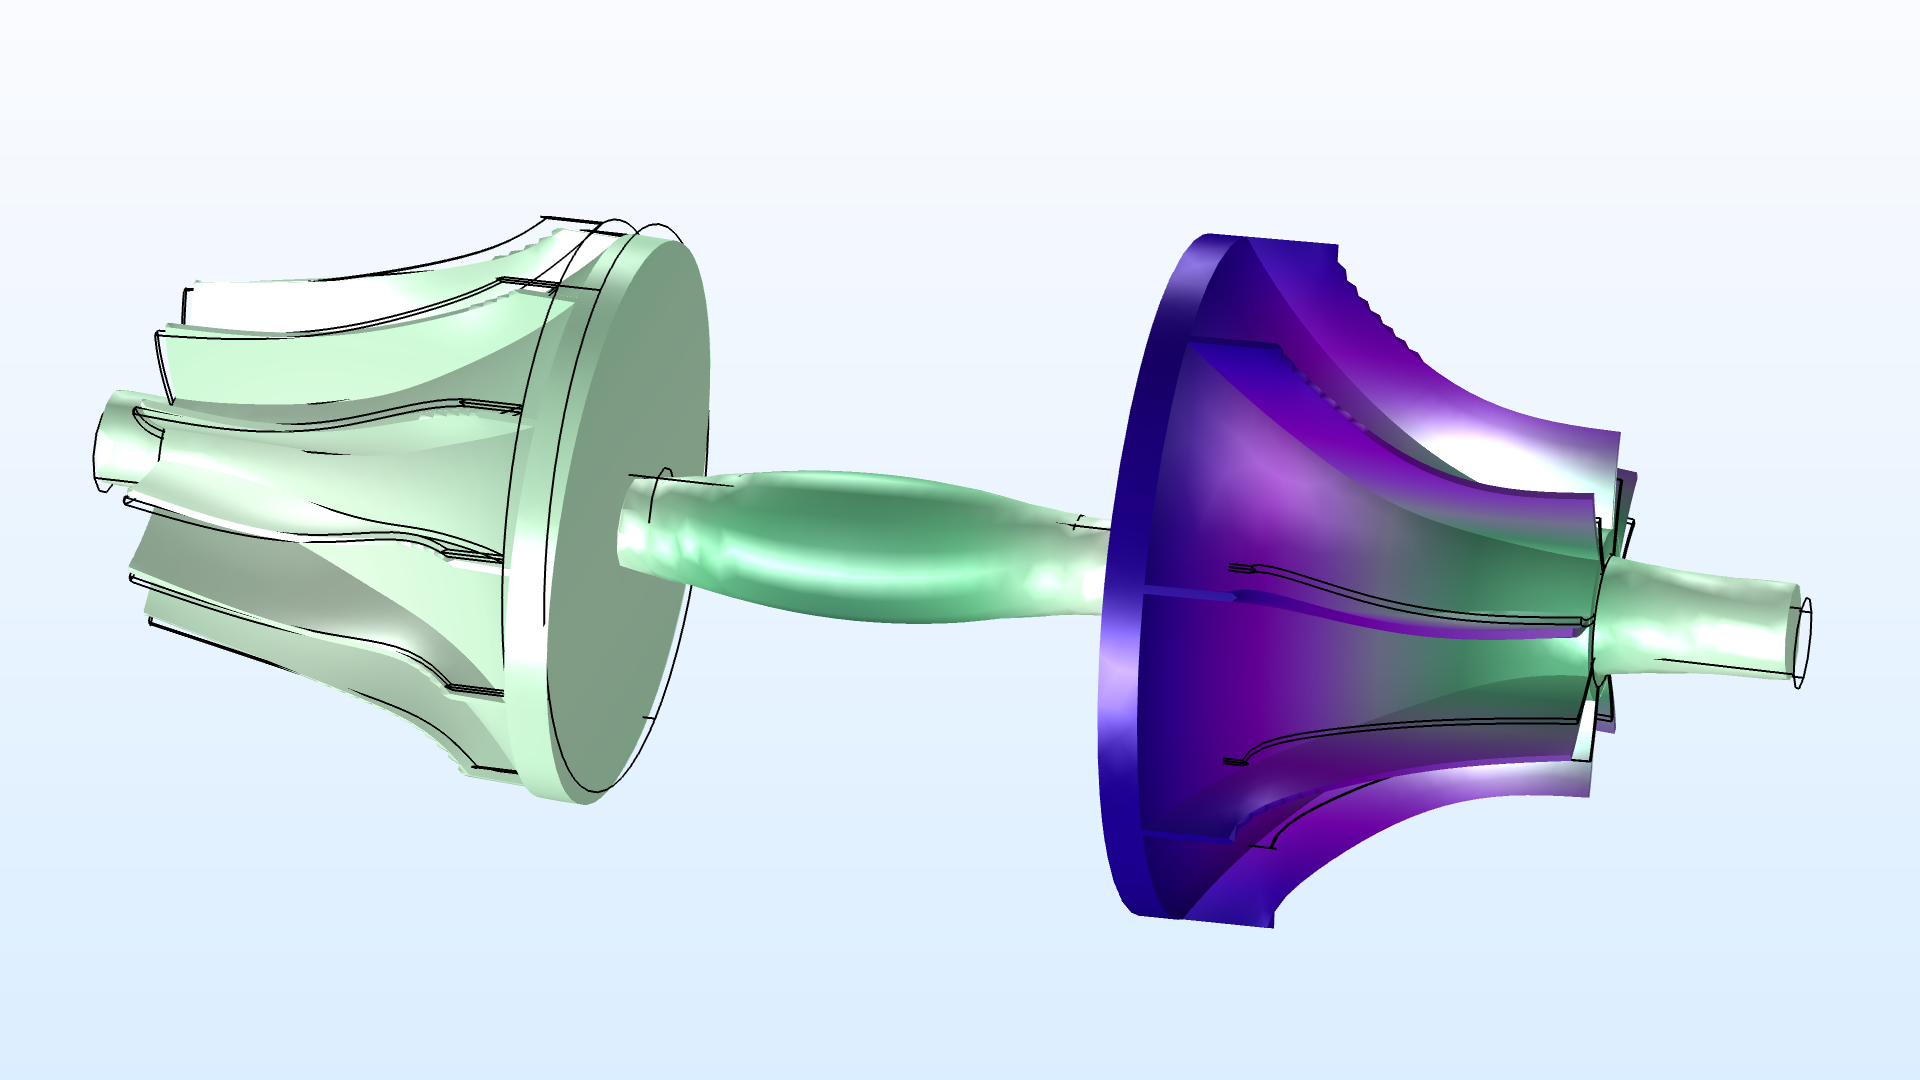 The Rotordynamics Module has a new model of a turbocharger that includes cross-coupled bearing forces.